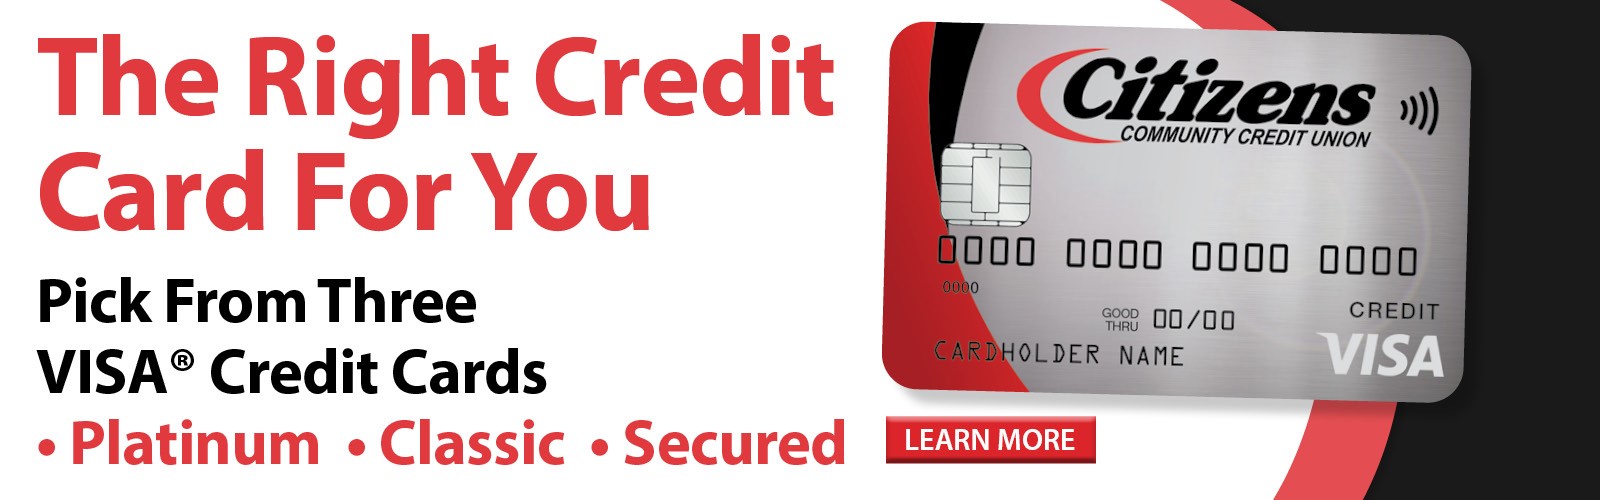 The Right Credit Card for You. Click here to learn more!